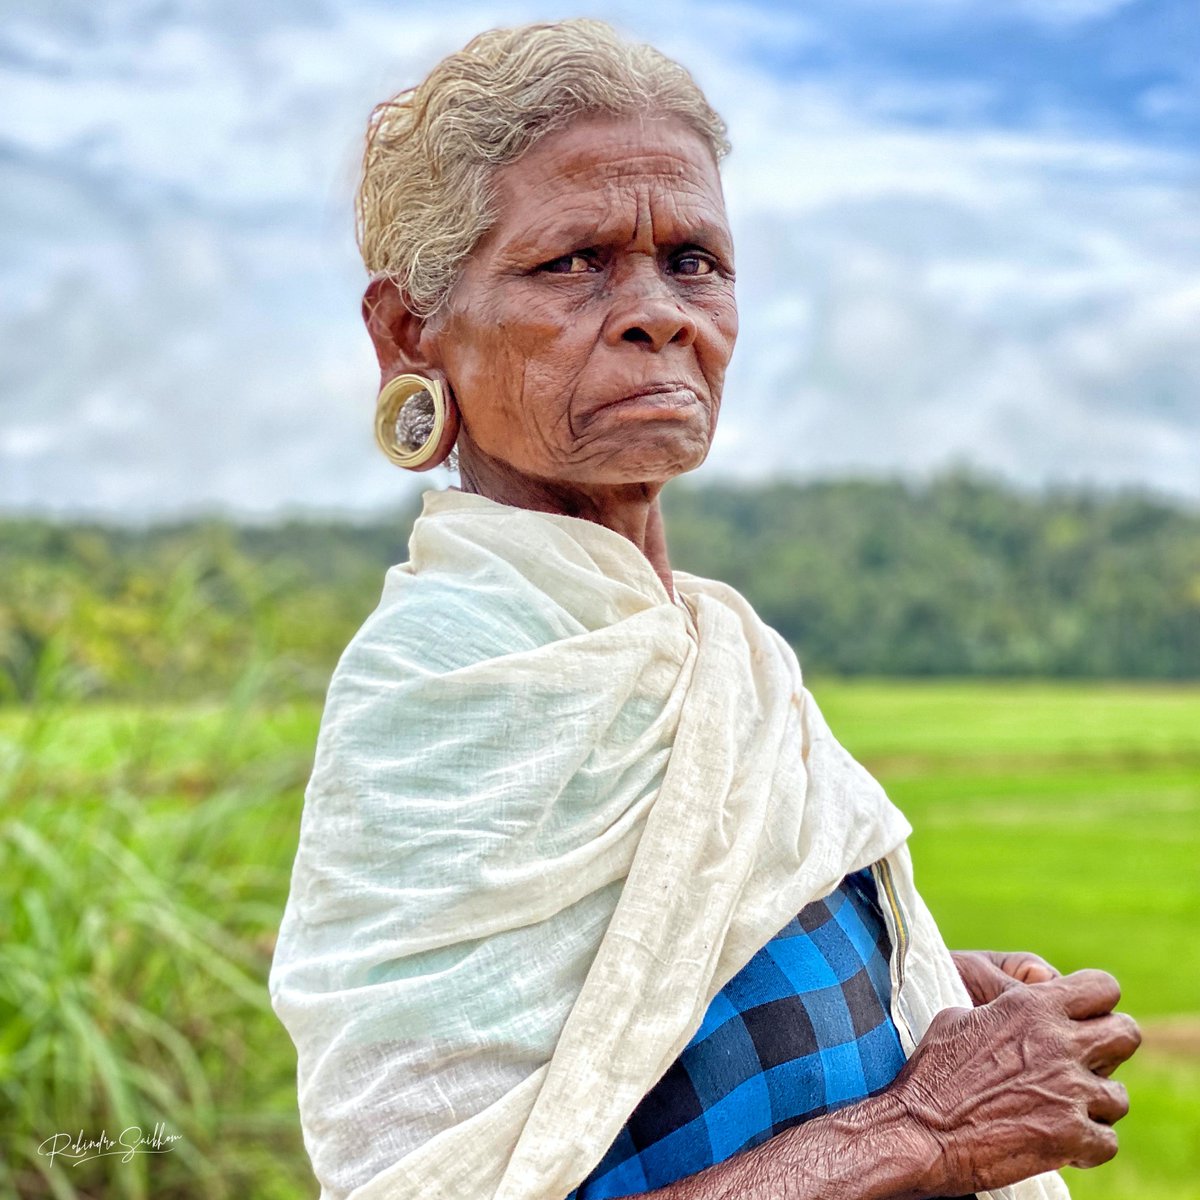 A #Paniya woman wearing a traditional oolay #earring. 
📍Sultan Bathery, #Wayanad

©️📸
#travel #travelinspiration #kerala #iphoneography #tribesofindia #adivasi #travellife #photooftheday #ethnicpeople #portraitoftheday #culture #endlessfaces #crafts #Peoples
@KeralaTourism